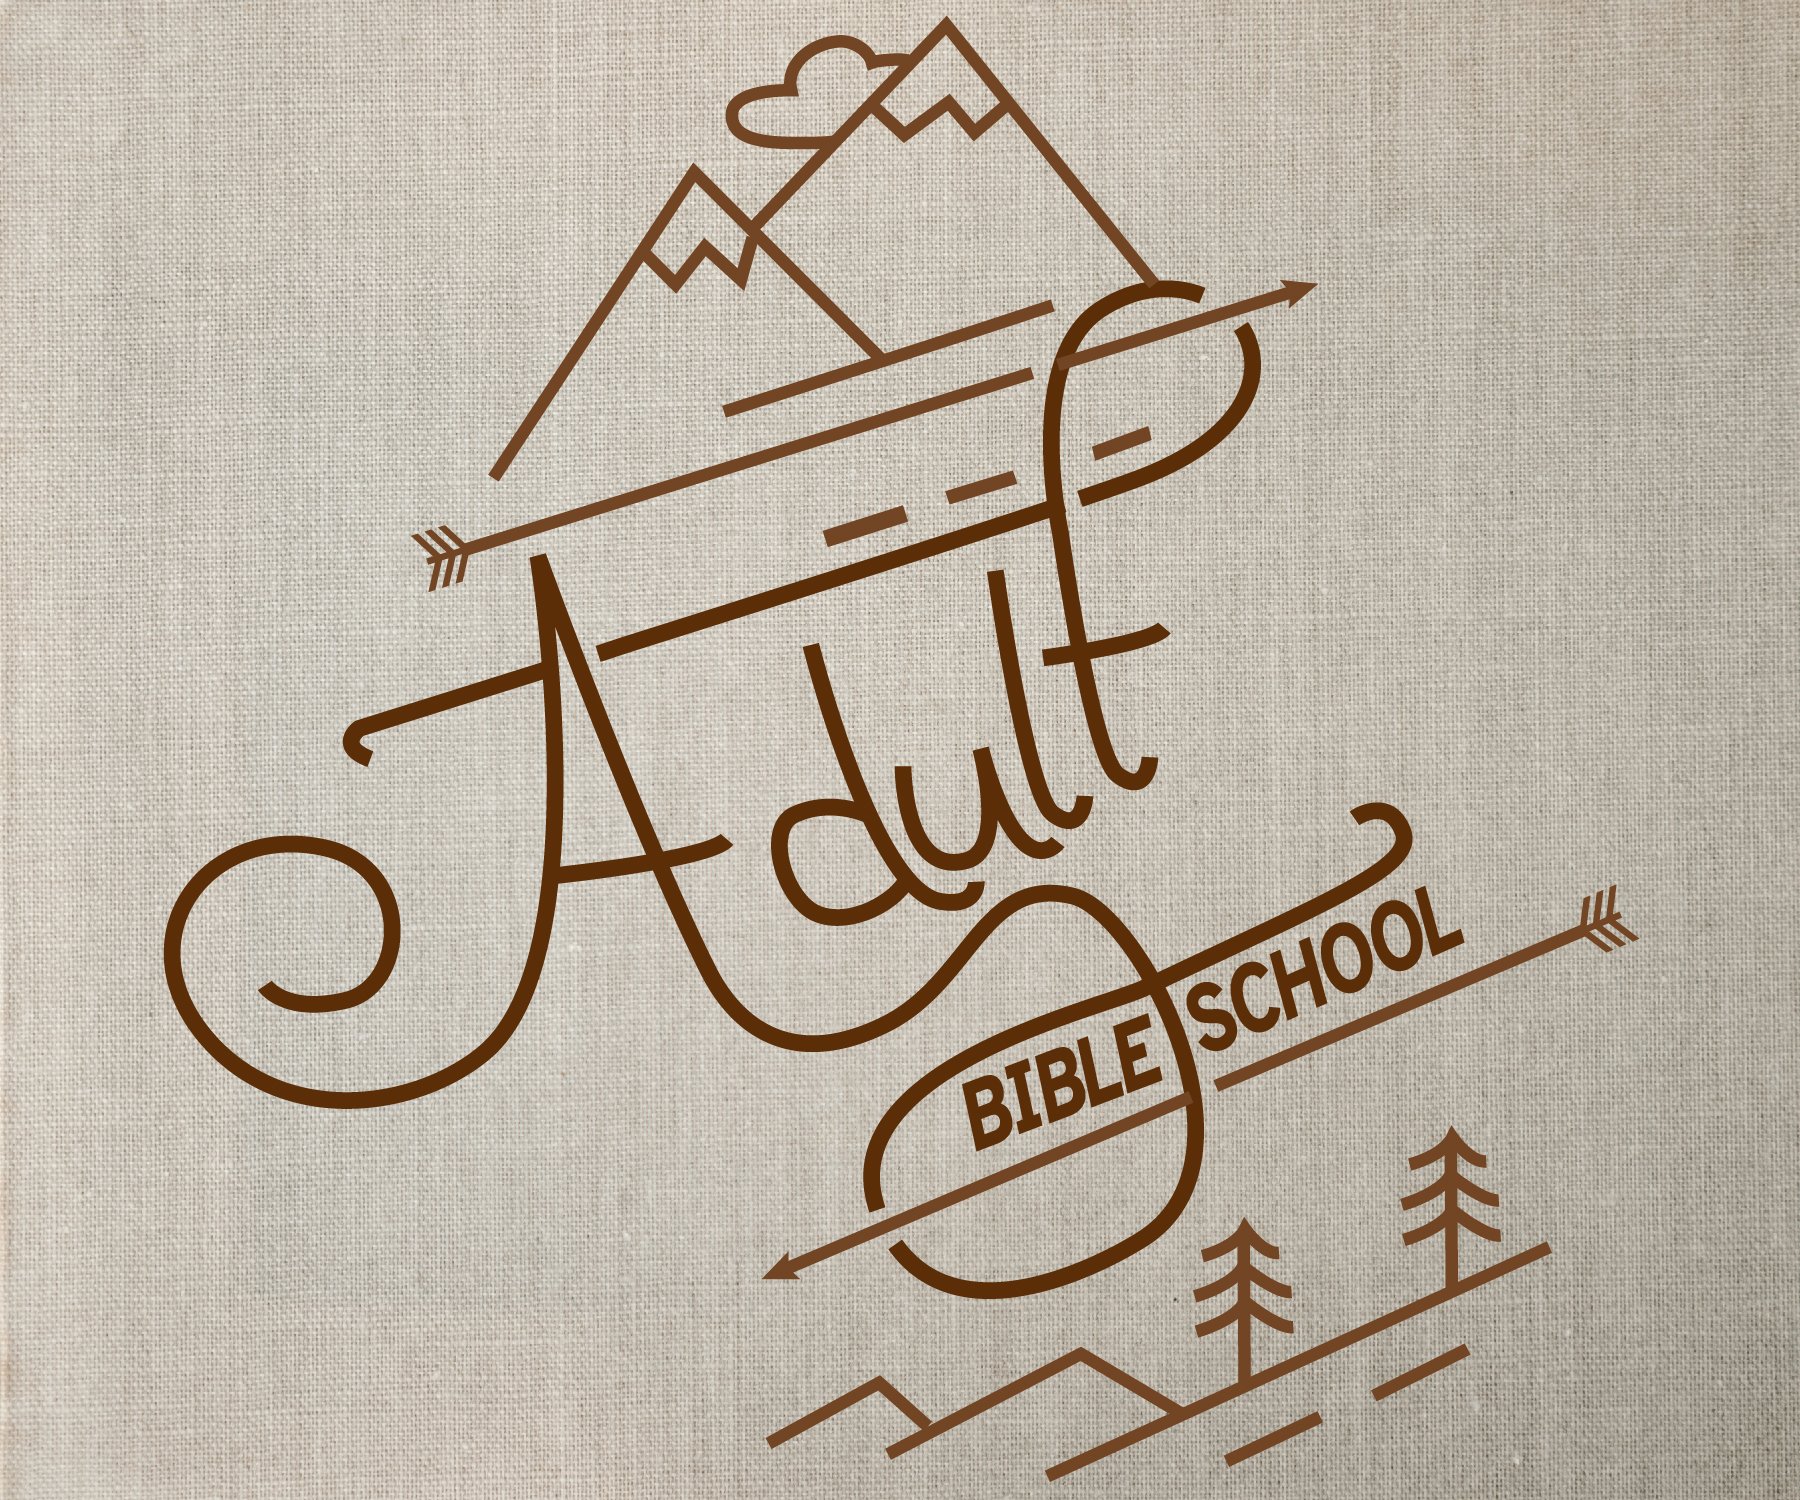 Adult Vacation Bible School is ready for sign ups, so save your spot July 29-31 from 9am-12pm!! 
See more details here: https://zion-lc.squarespace.com/events-calendar/adult-vacation-bible-school